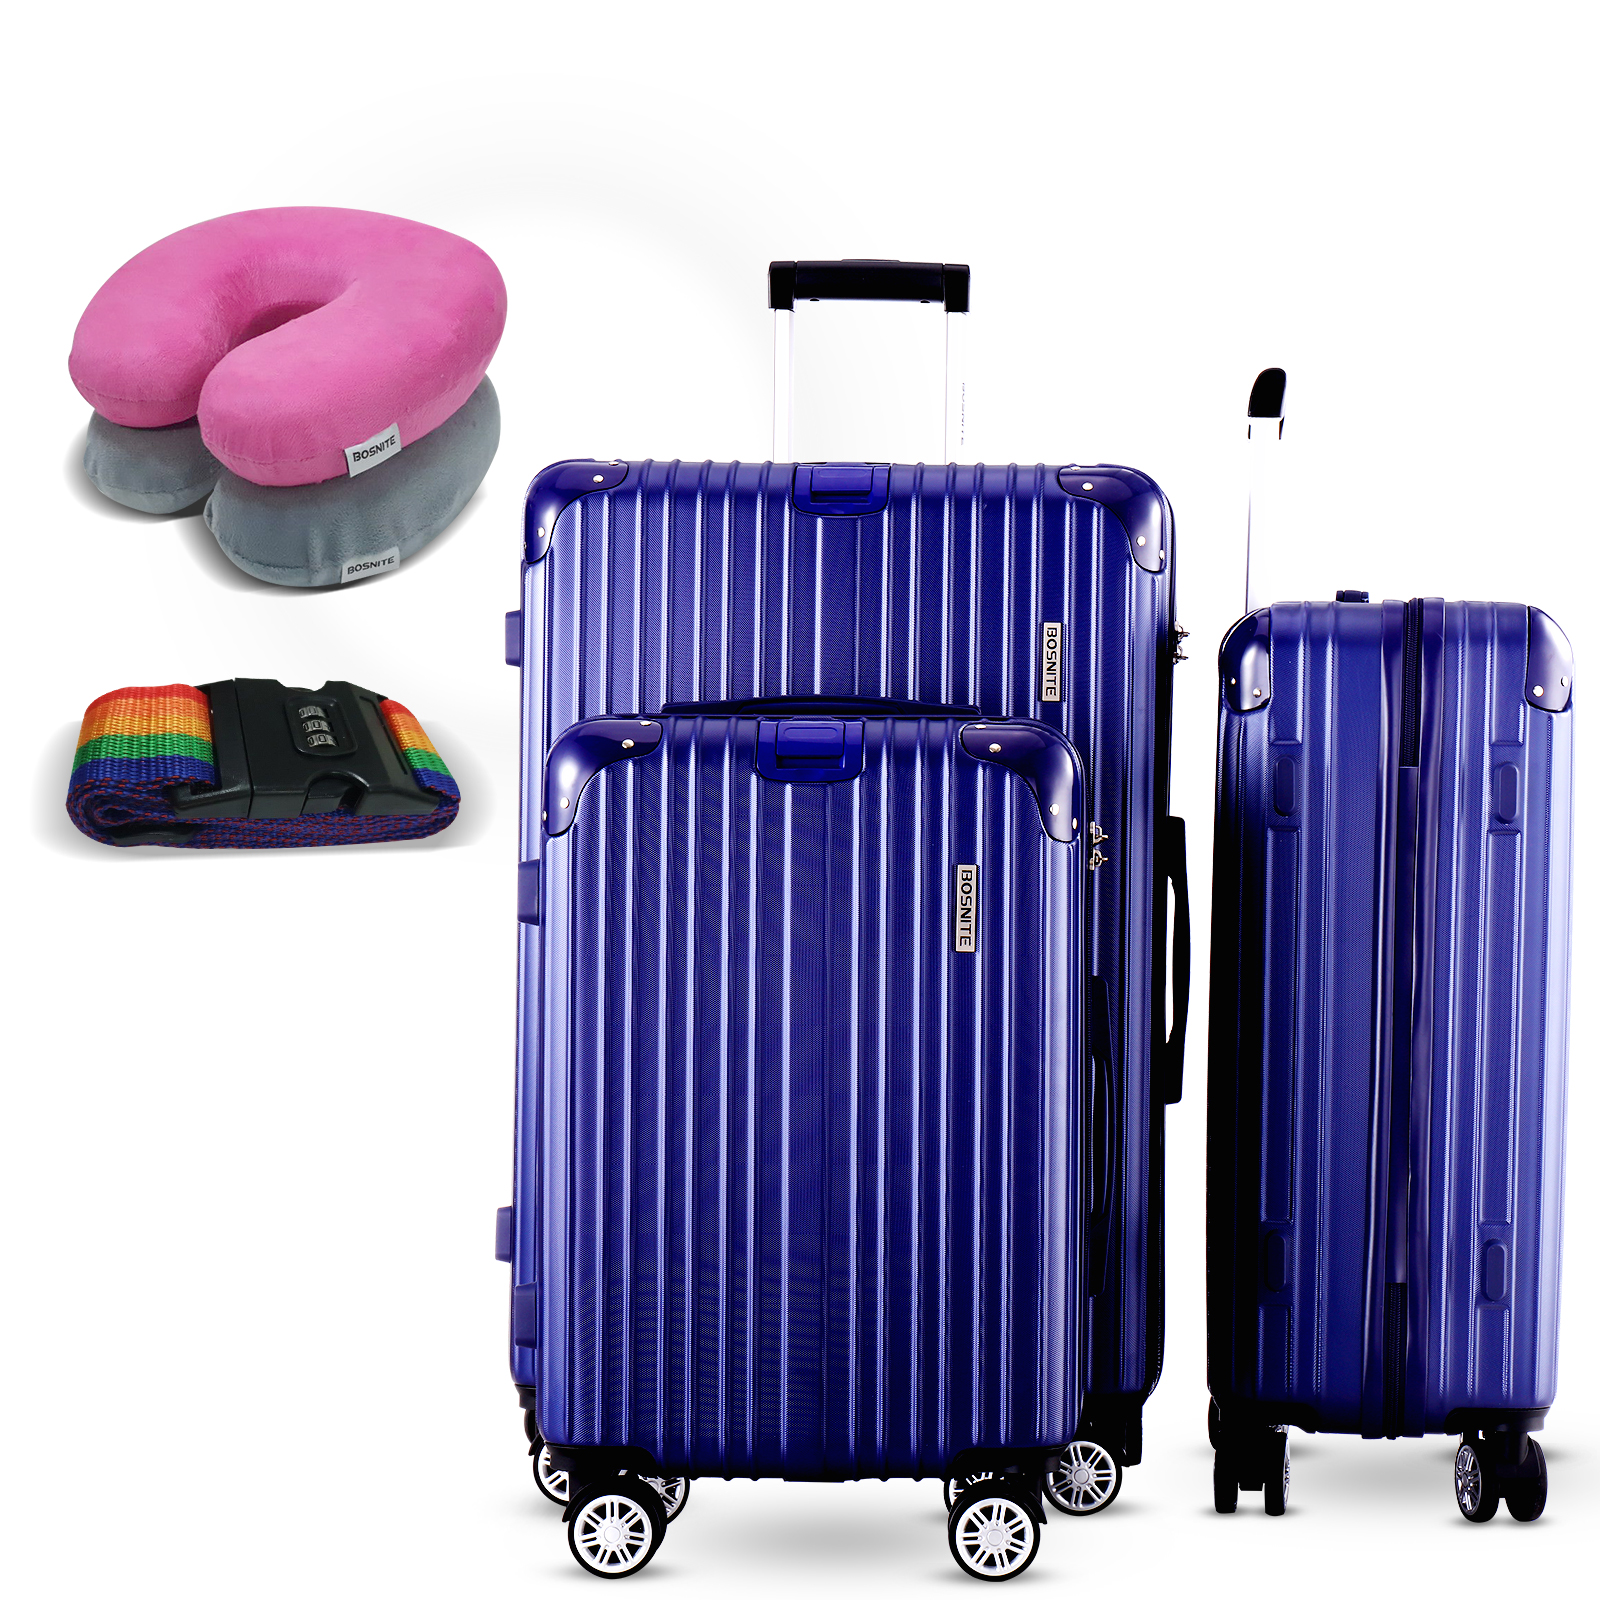 3 Piece Luggage Set - Blue Hard Case Carry on Travel Suitcases